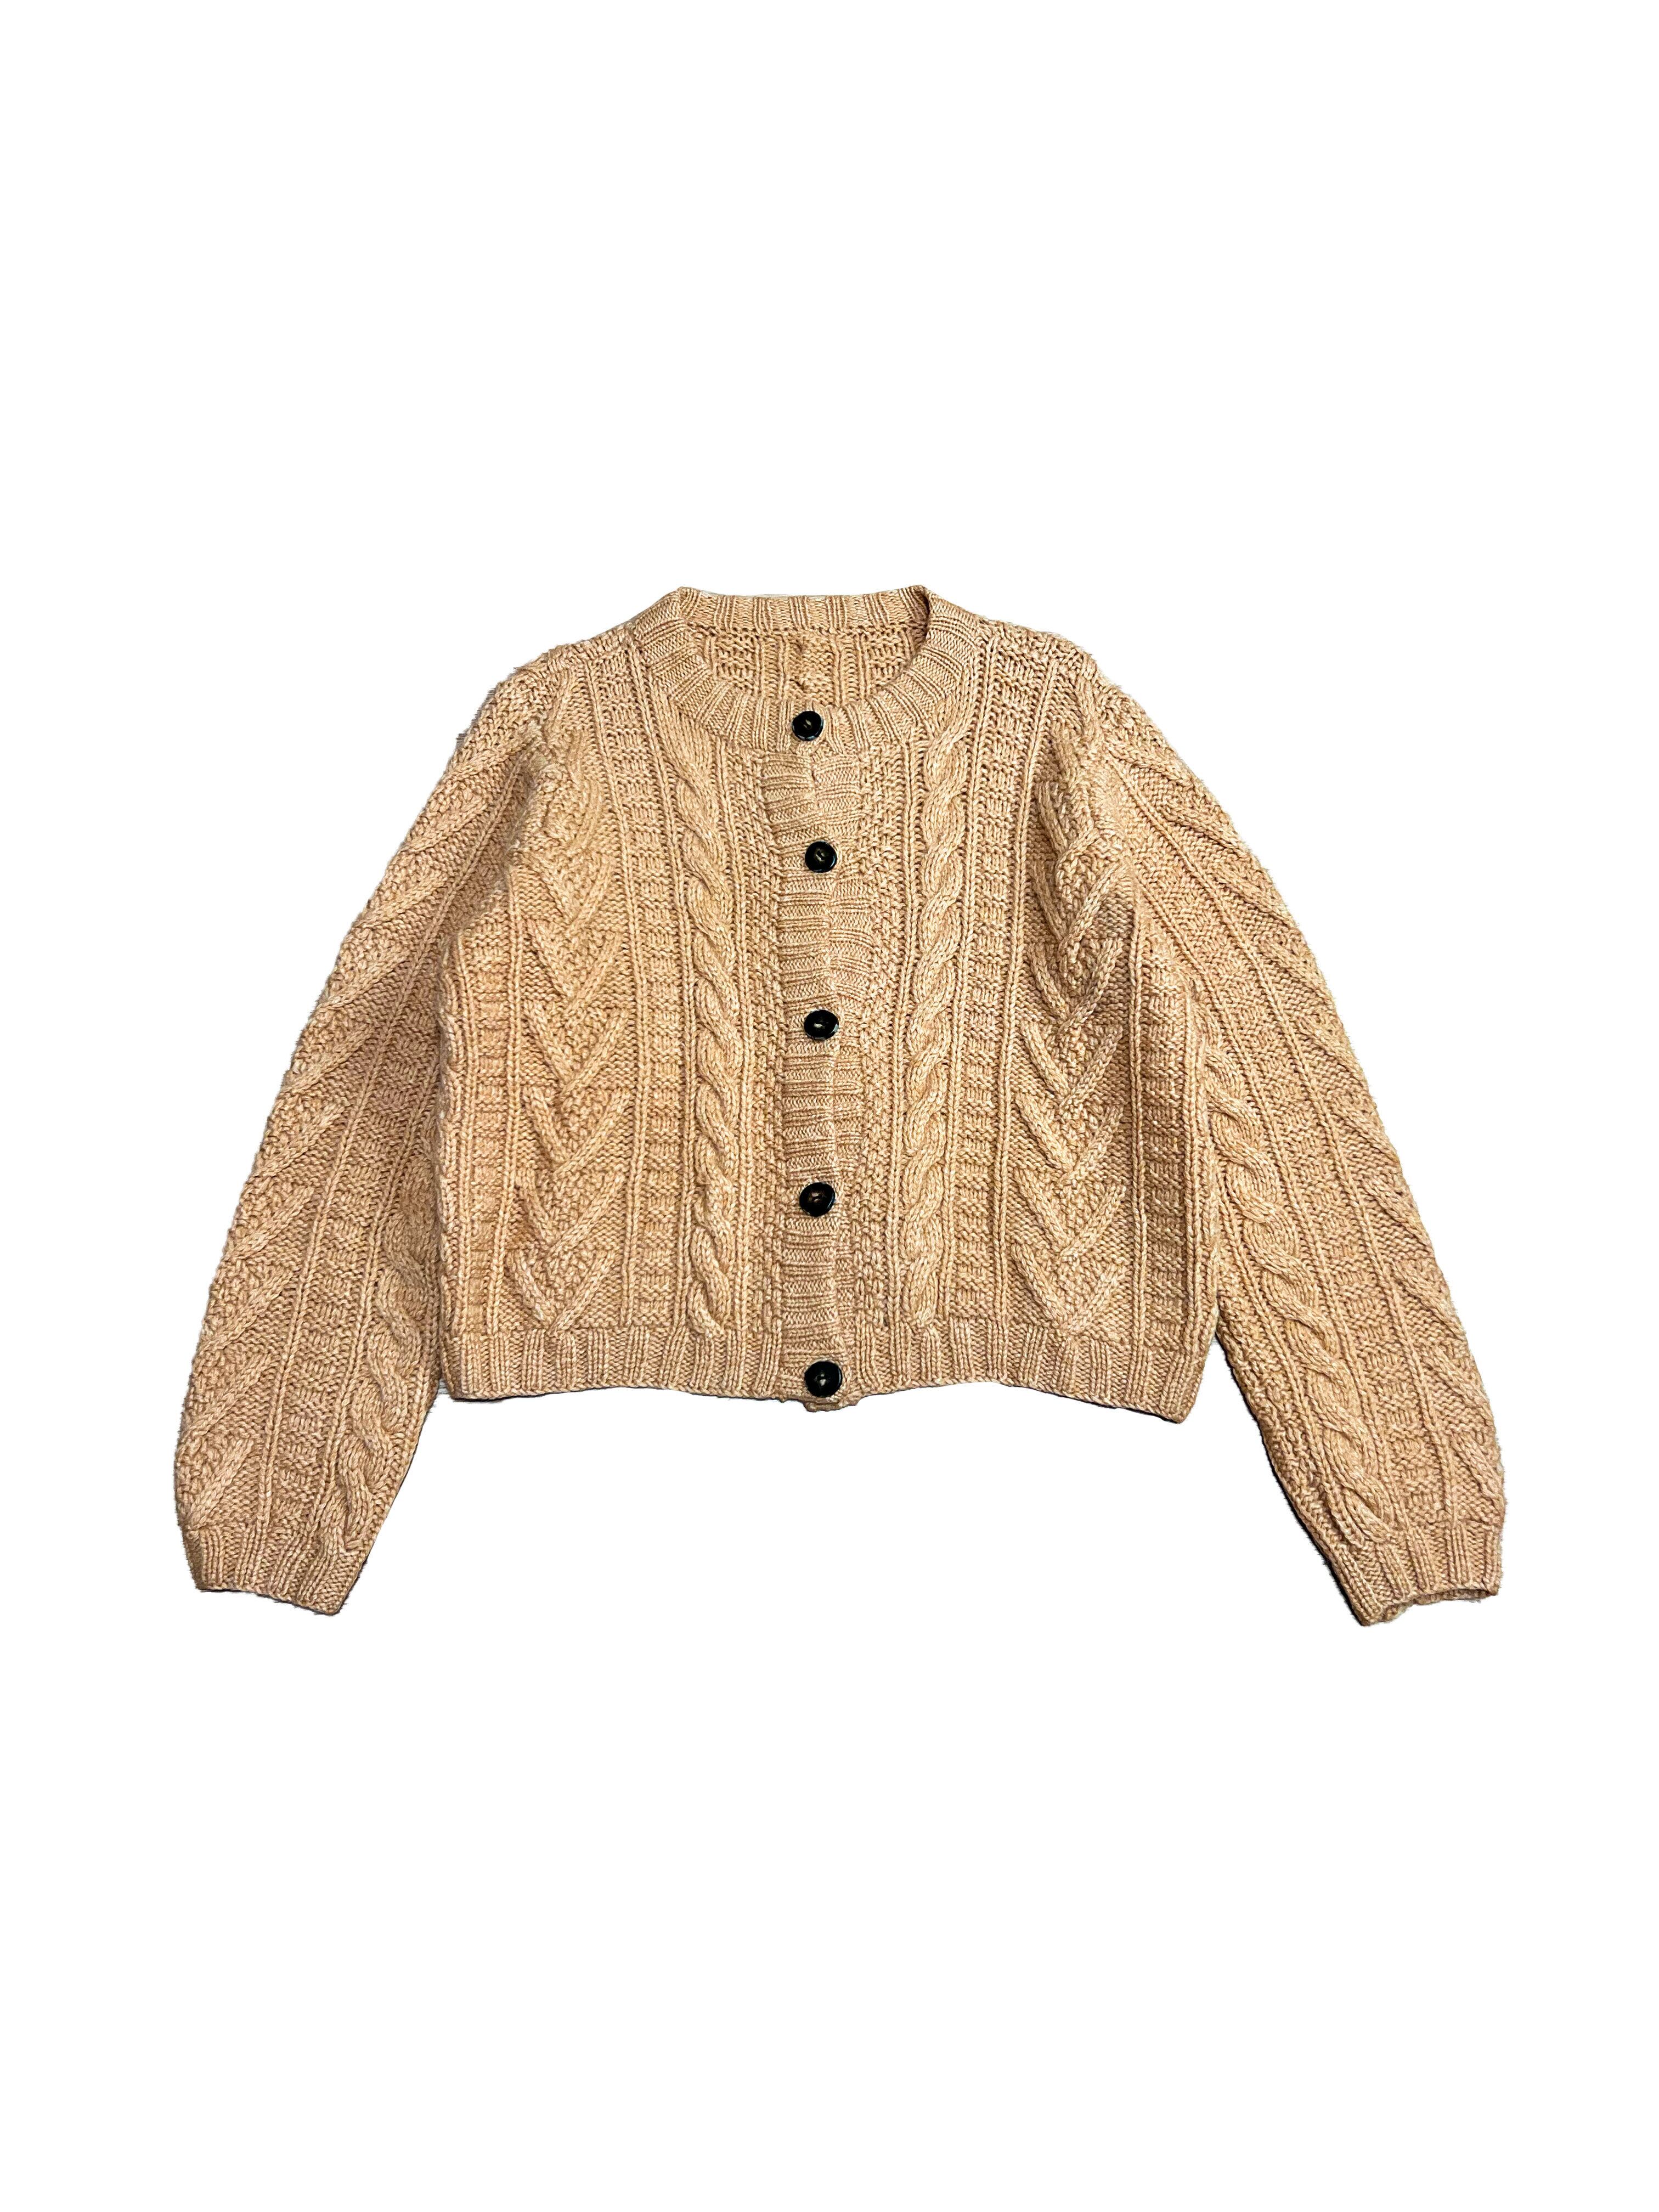 ♡vintage cable knit cardigan♡